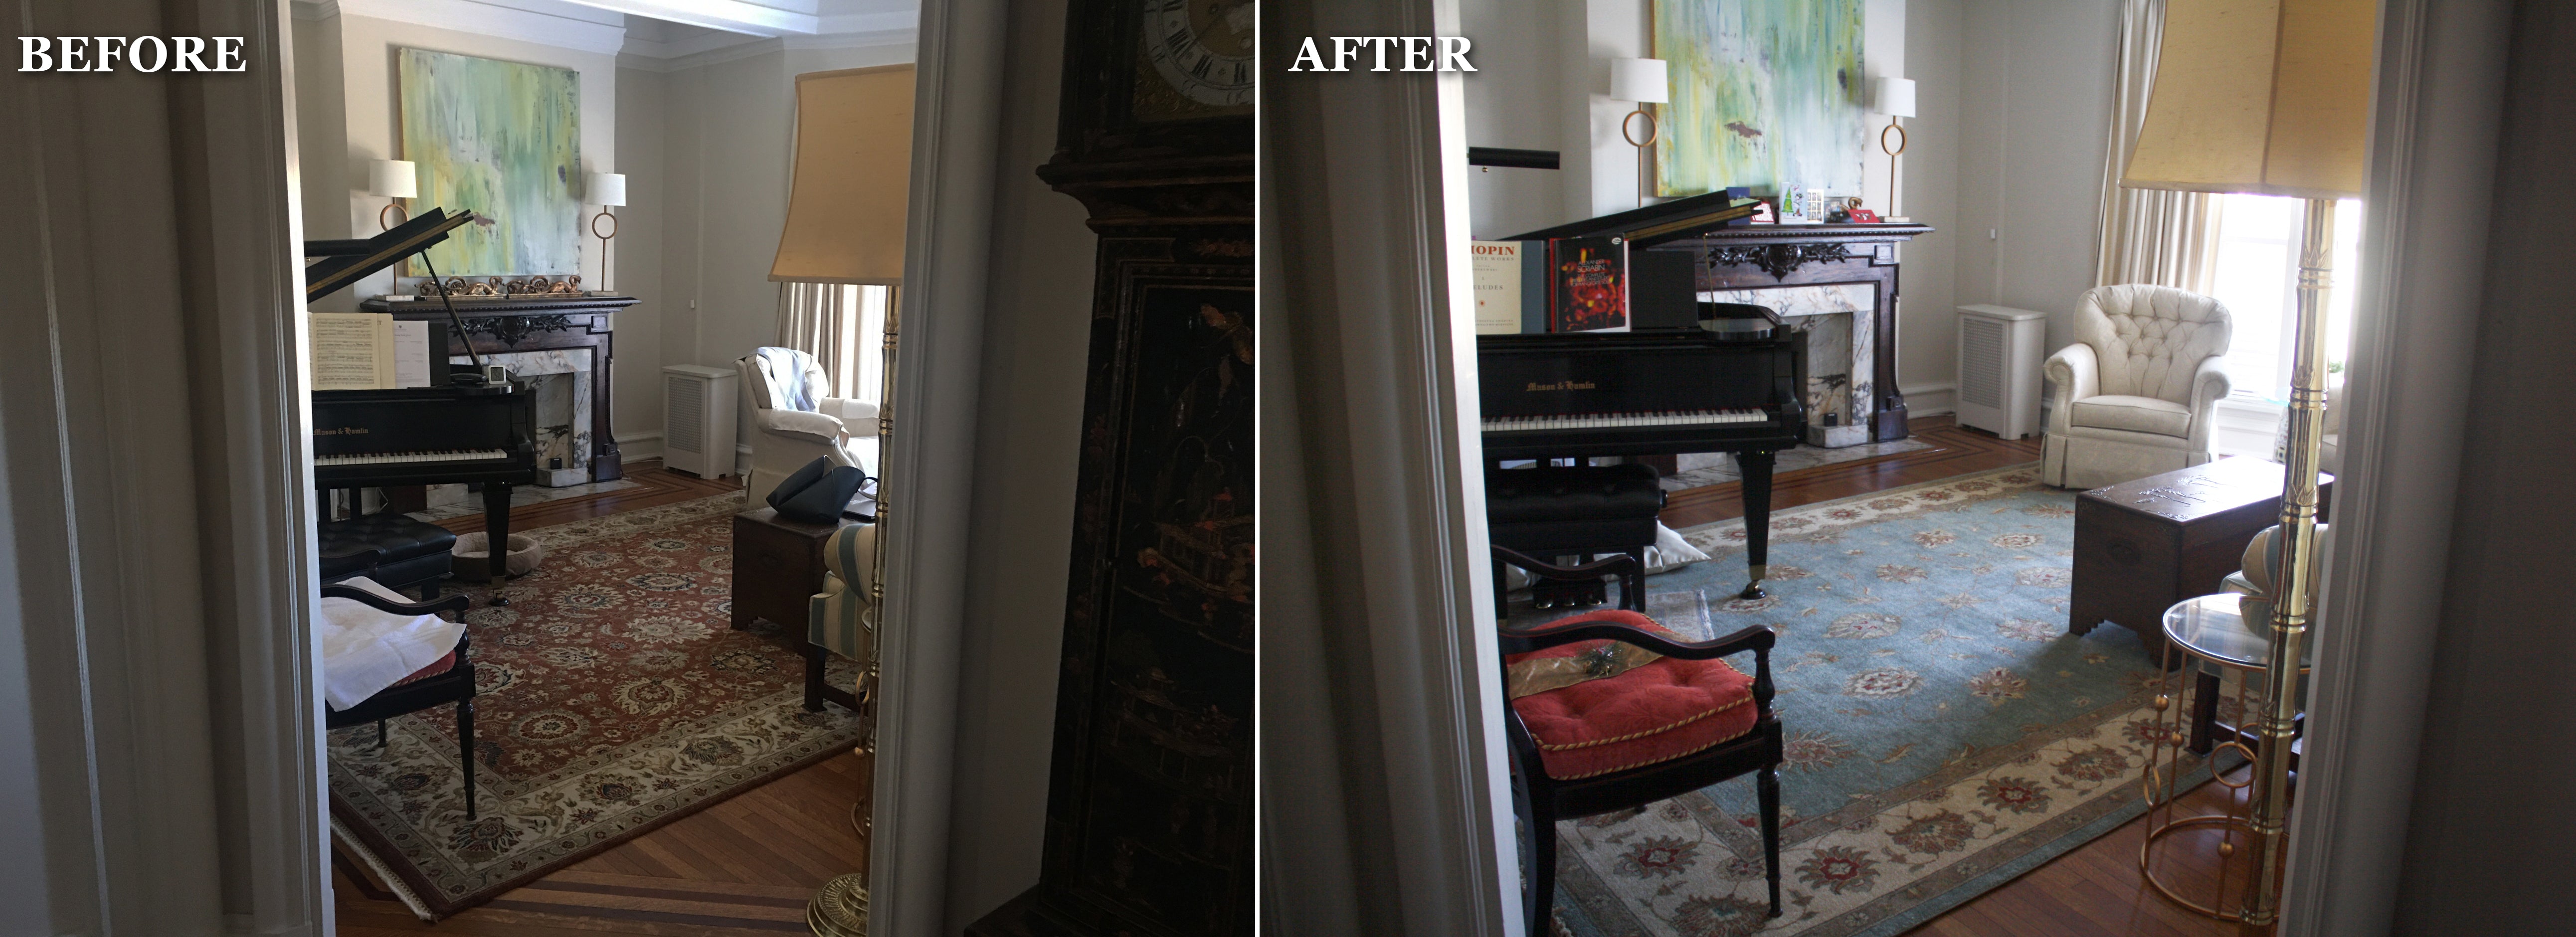 Interior design before and after with Persian rug